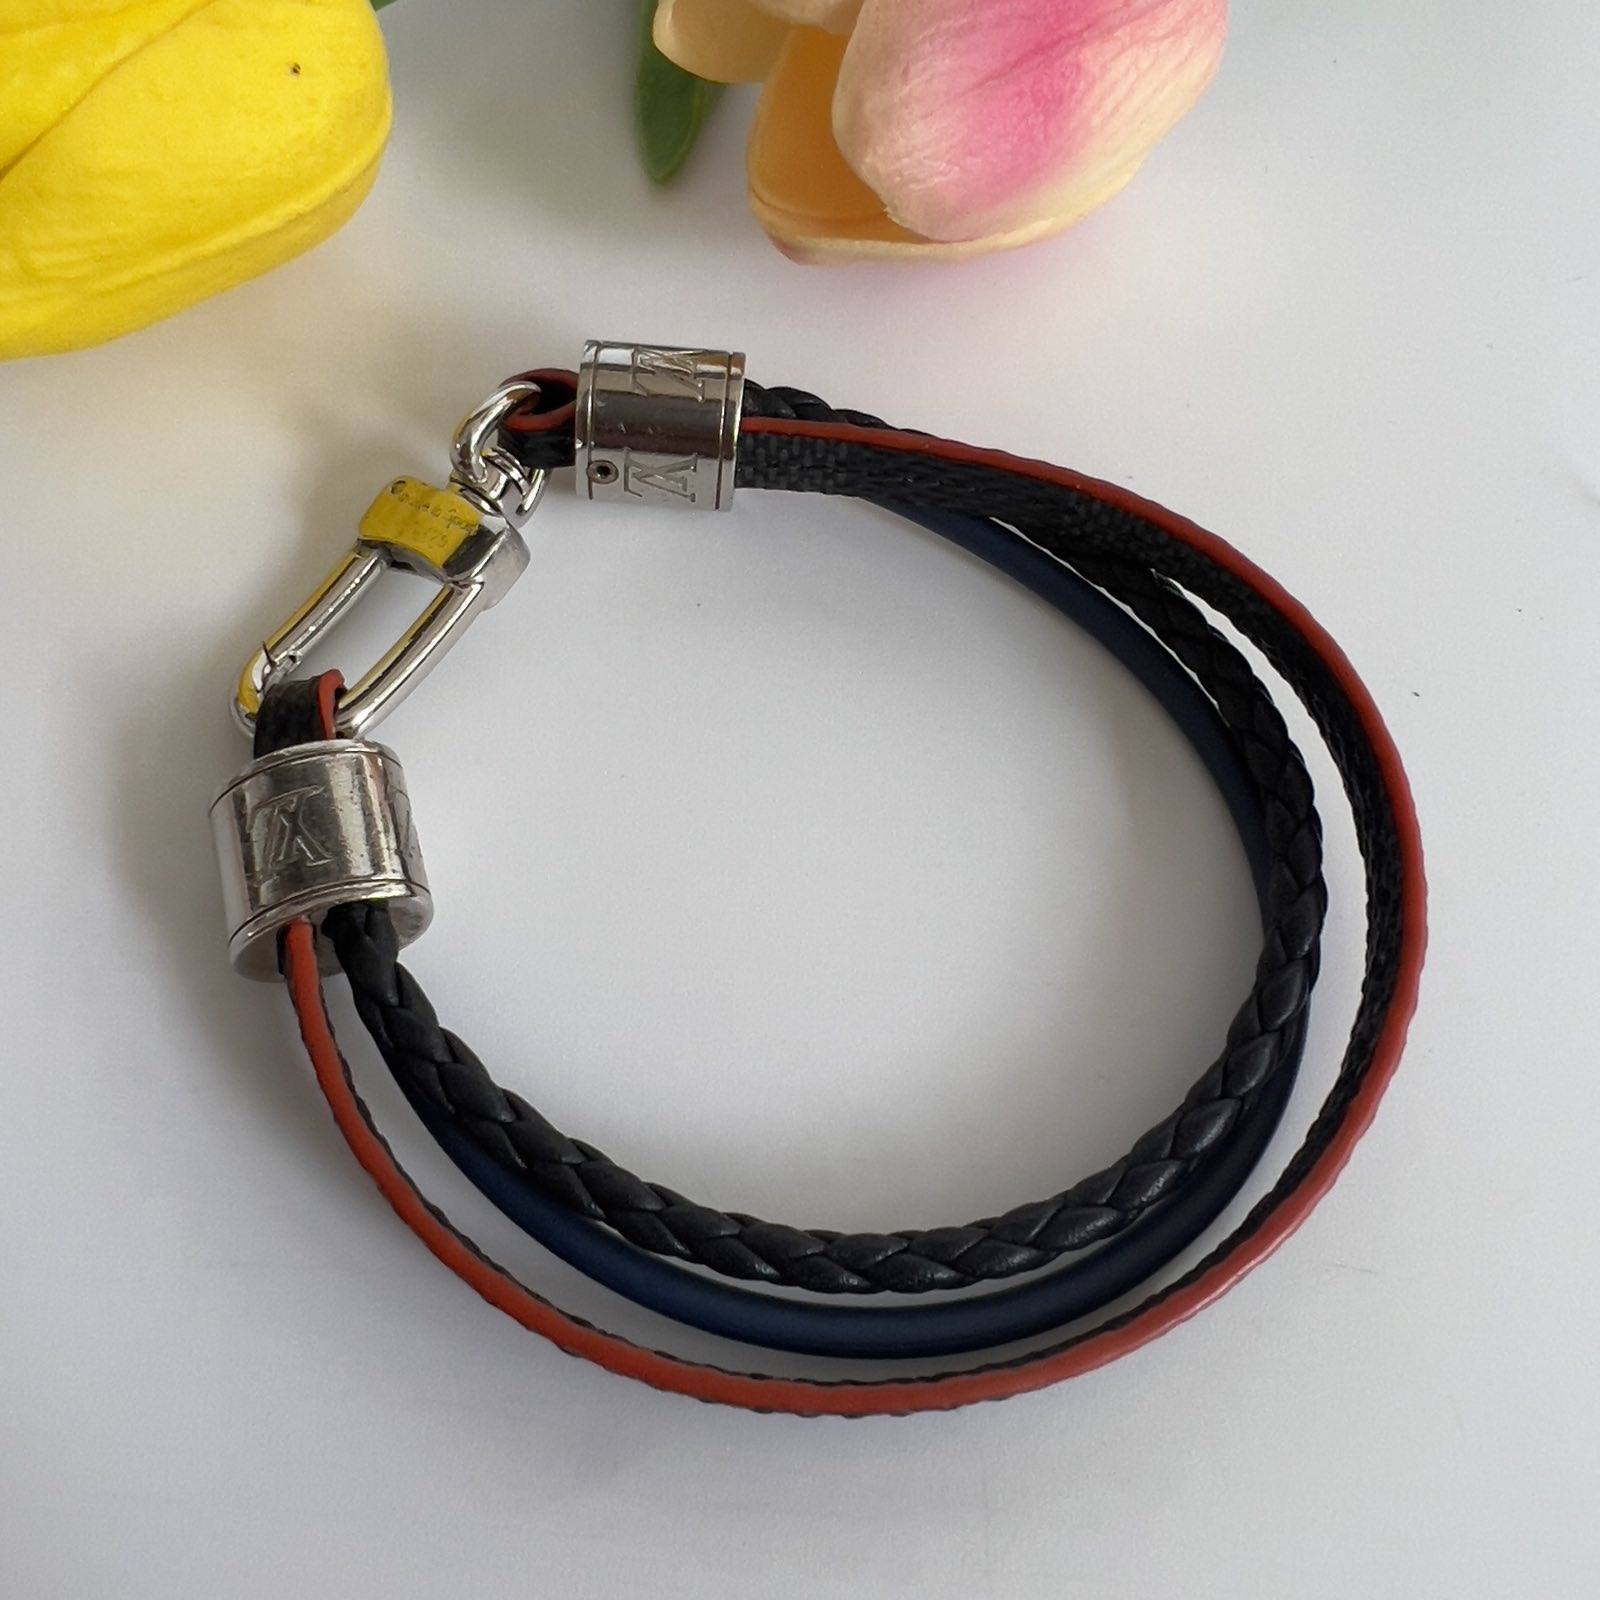 Louis Vuitton Treble Calf Leather Bracelet. Made in Spain. With dustbag ❤️